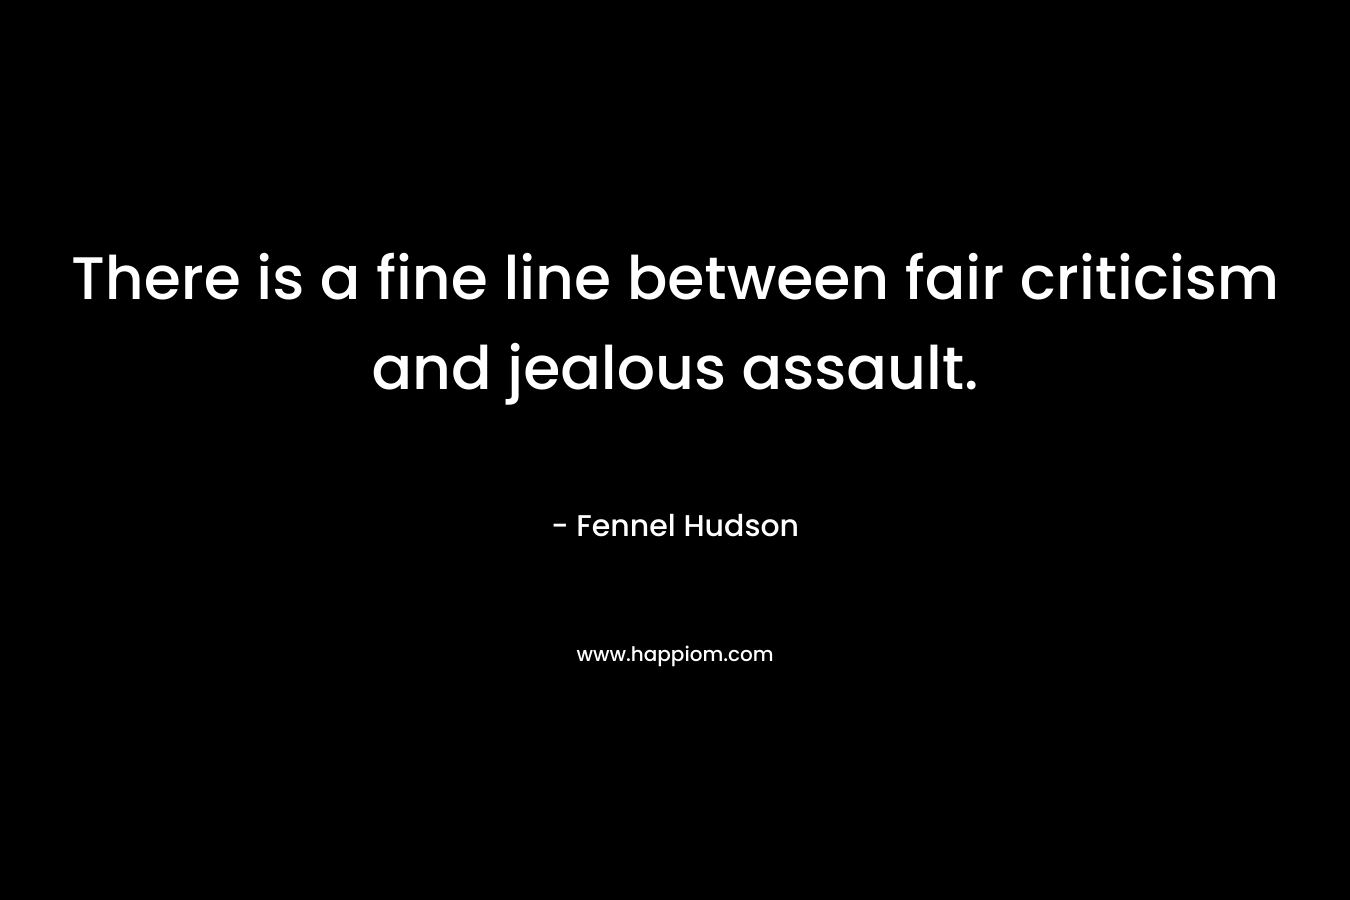 There is a fine line between fair criticism and jealous assault. – Fennel Hudson